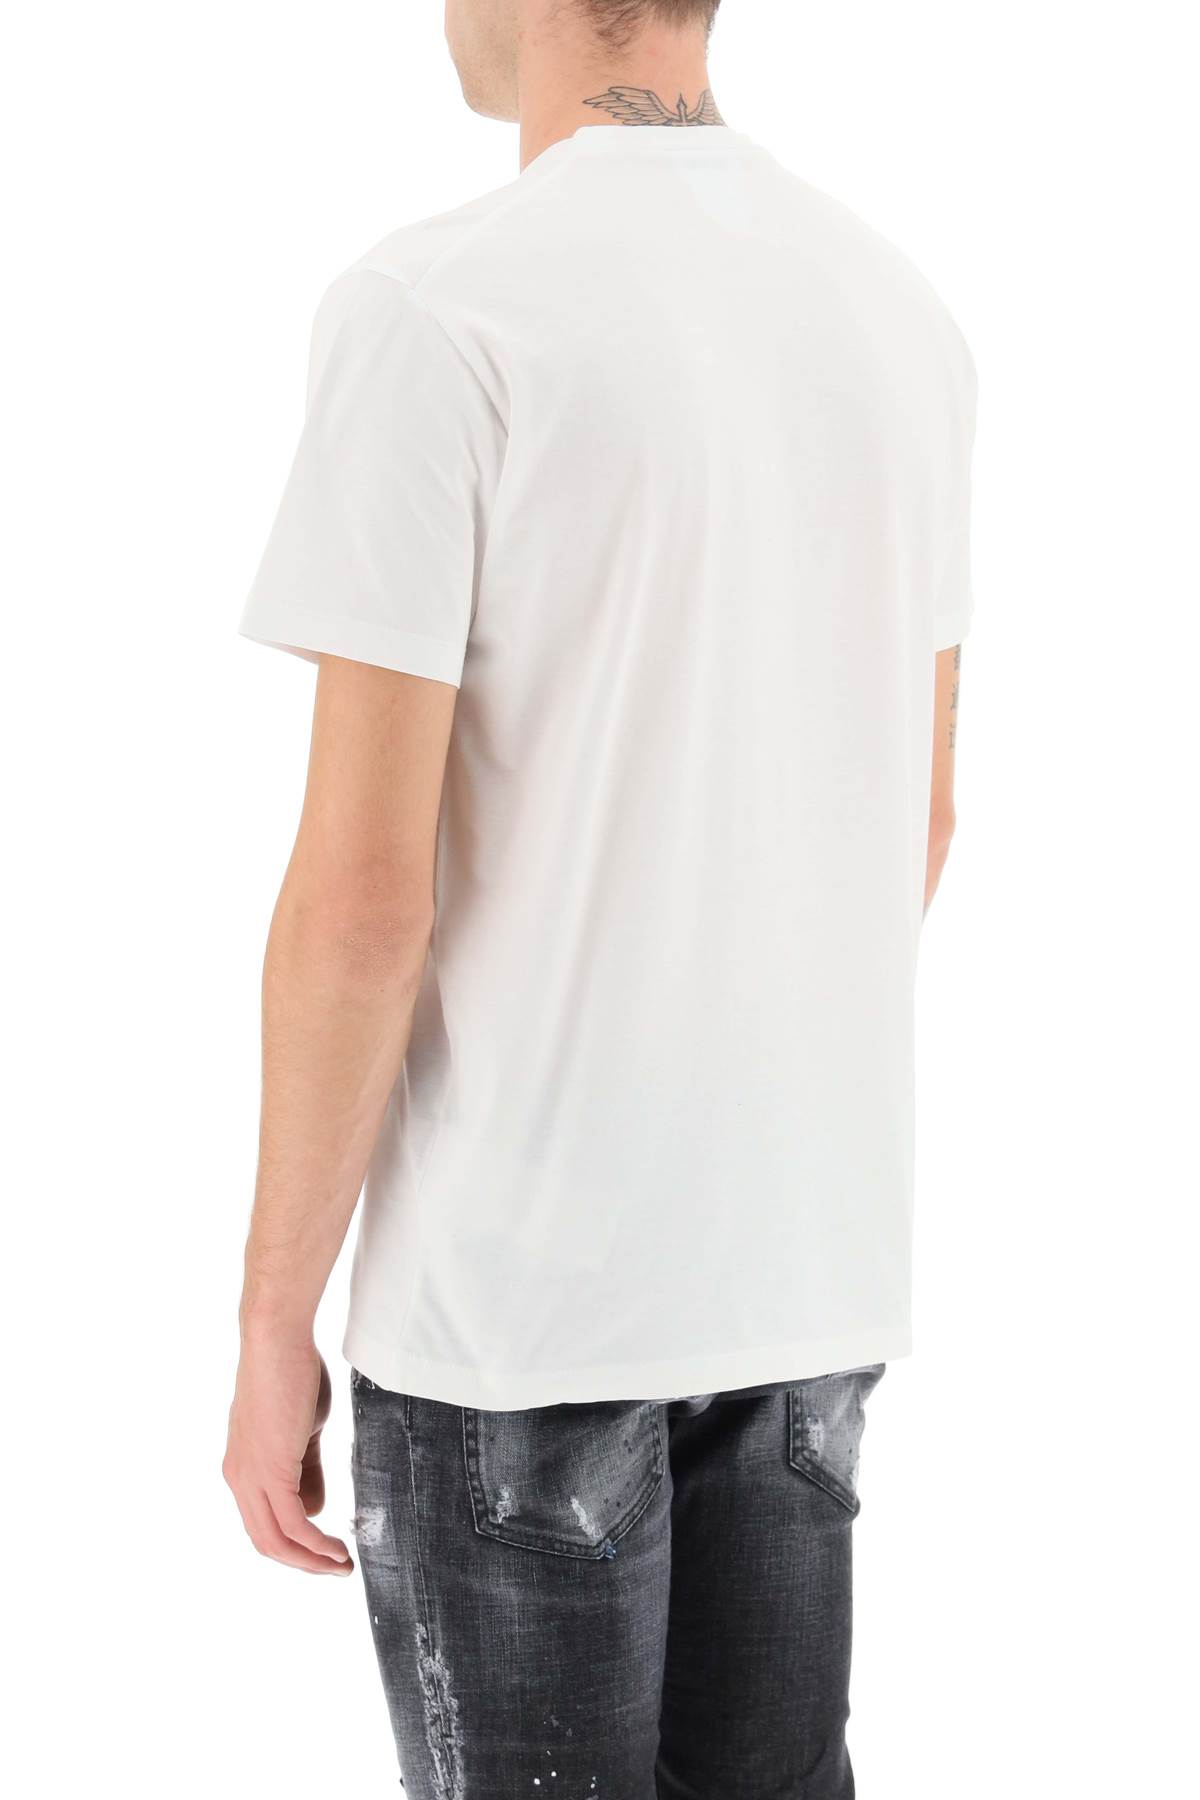 Shop Dsquared2 D2 Goth Surfer T-shirt In White (white)